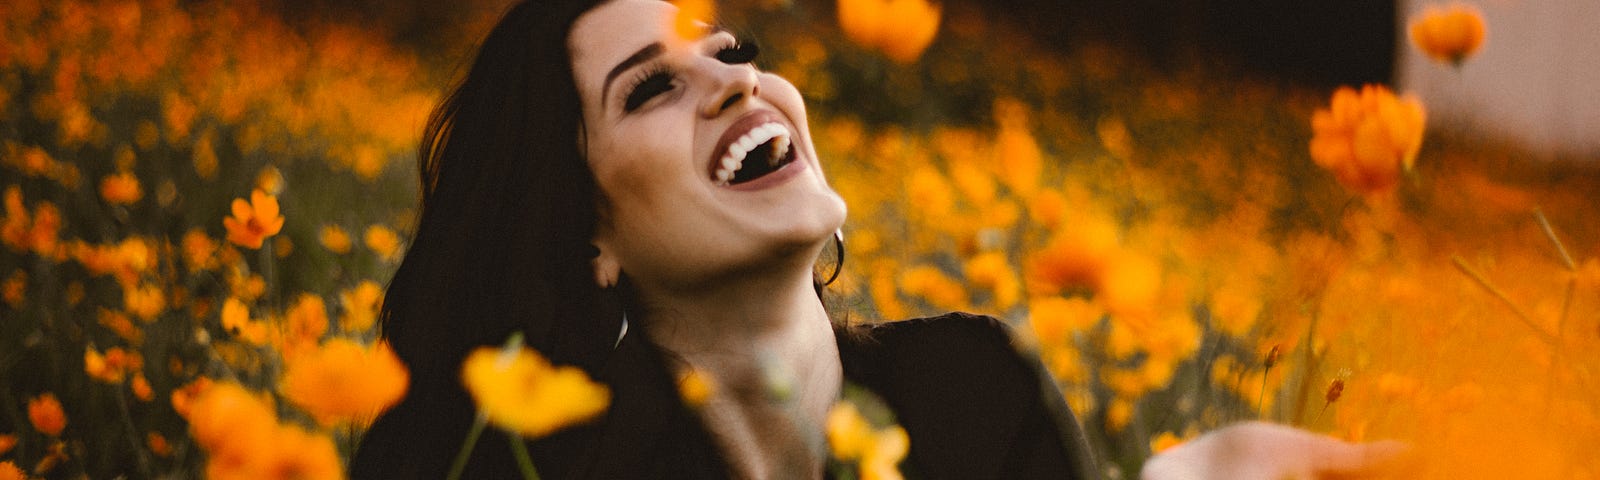 Woman laughing in a field of yellow and orange flowers